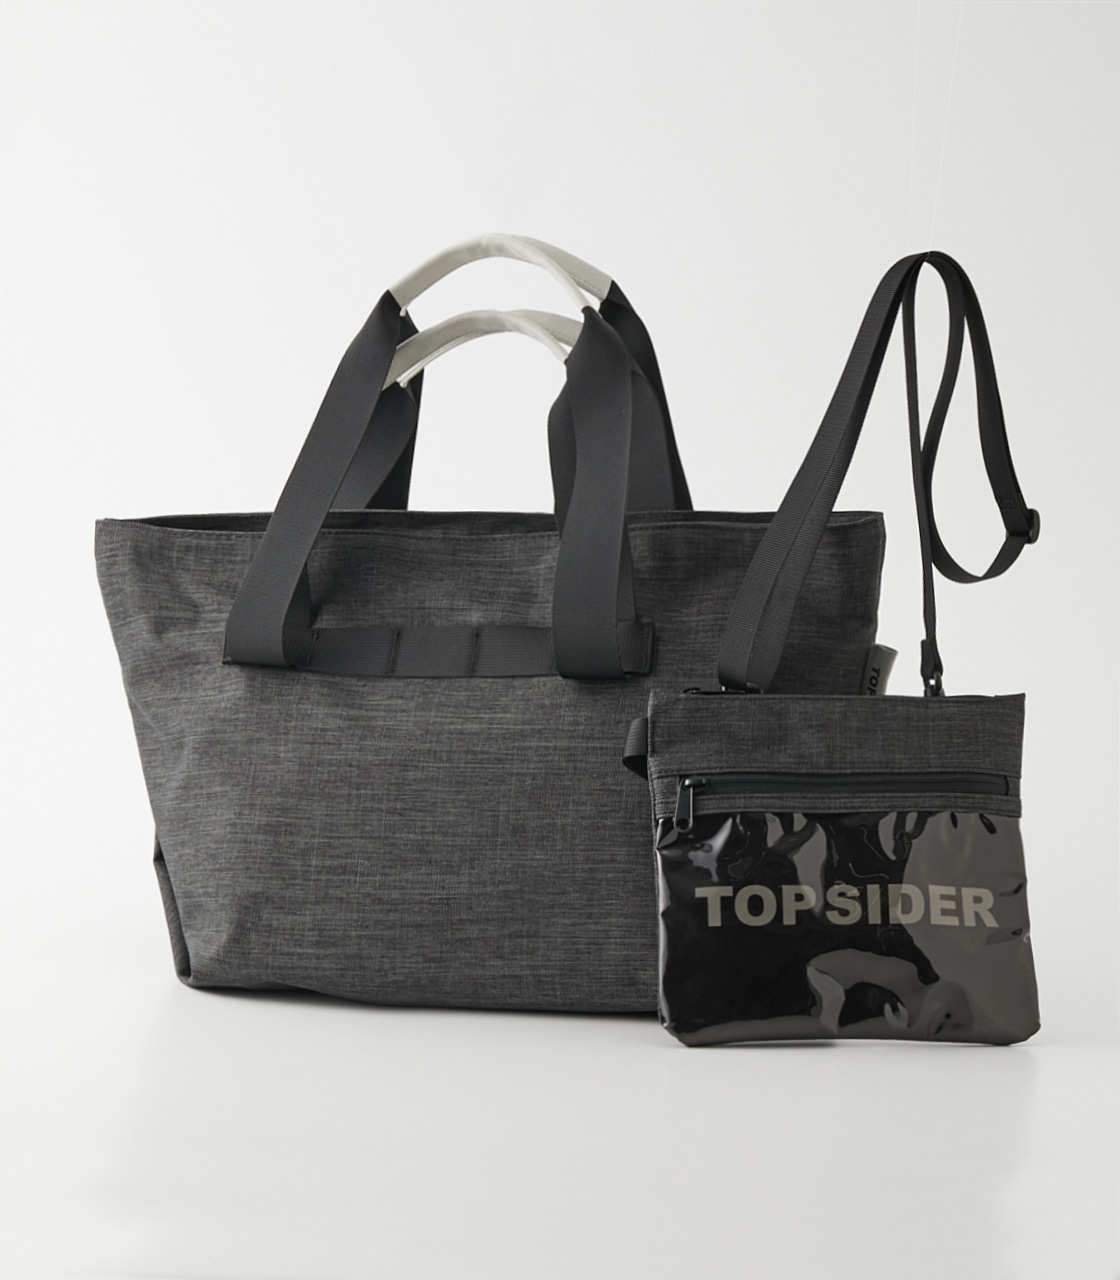 TOP SIDER×AZUL BIG TOTE BAG/TOP SIDER×AZULビッグトートバッグ 詳細画像 C.GRY 1